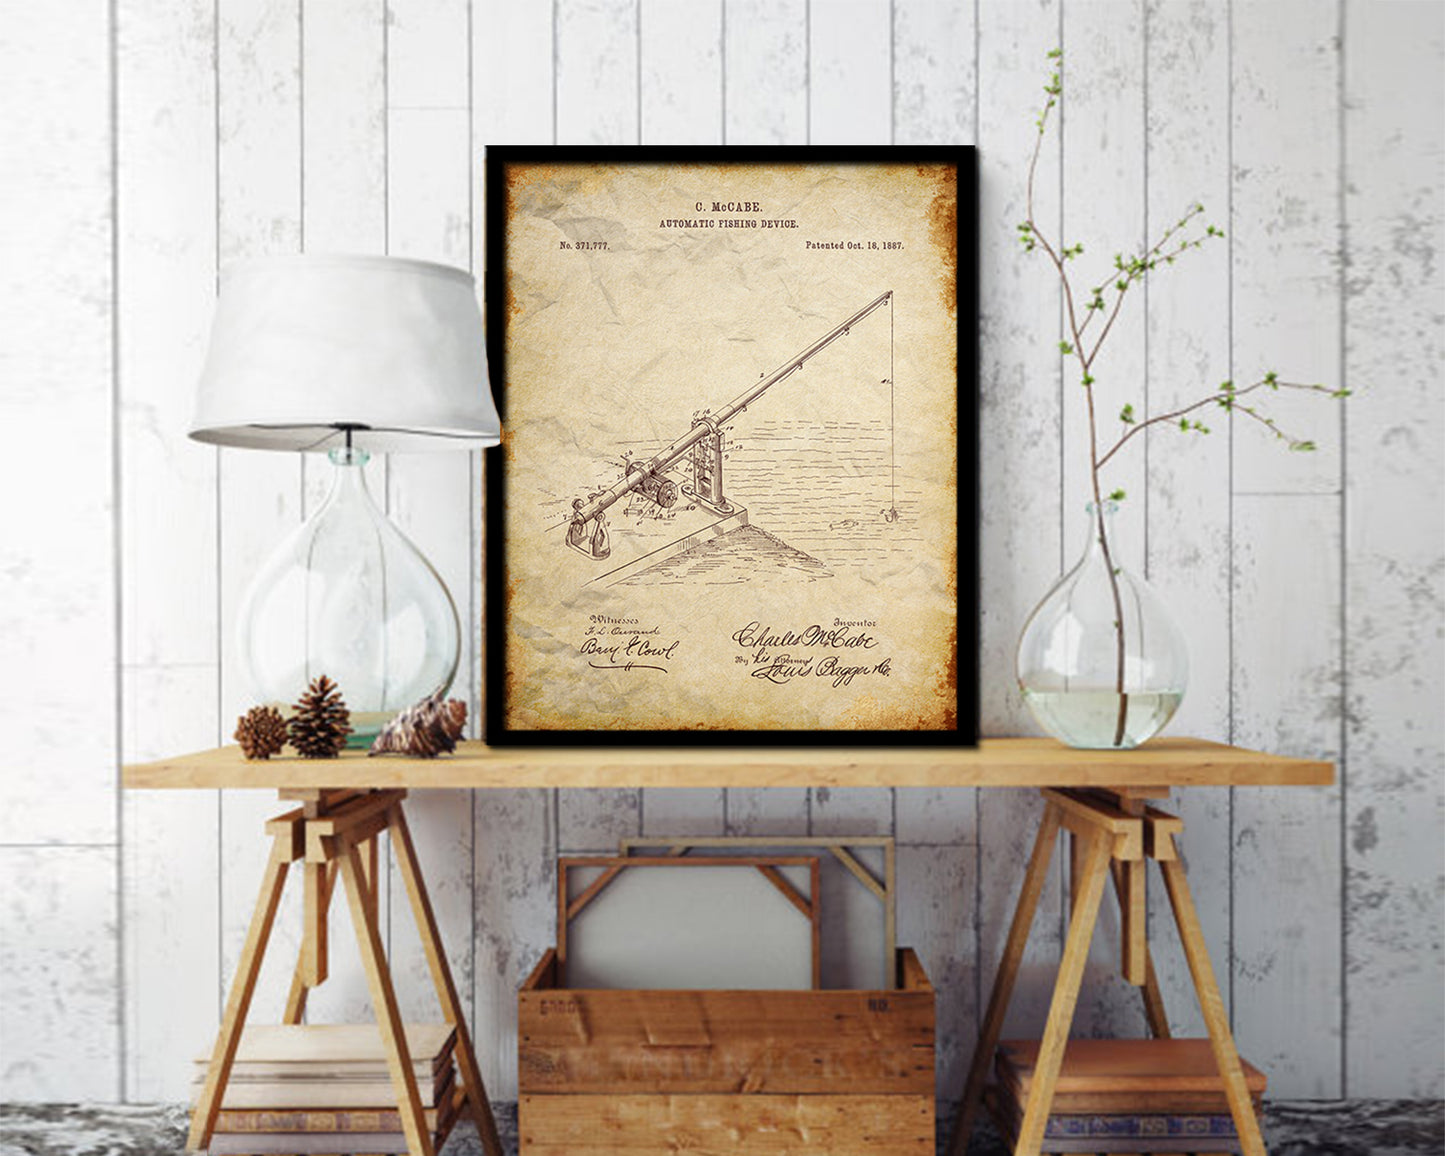 Automatic Fishing Device Fishing Vintage Patent Artwork Walnut Frame Gifts